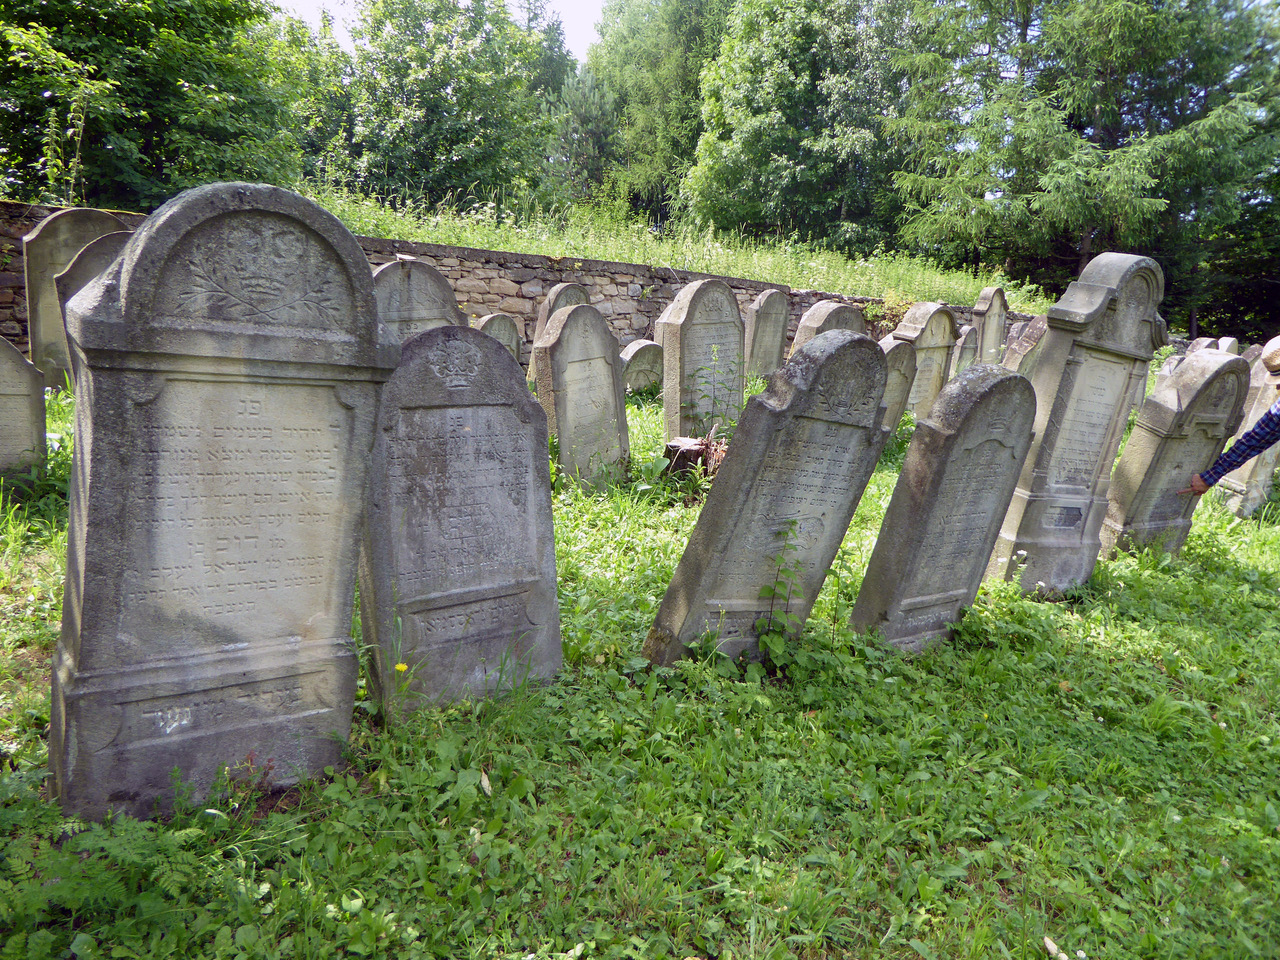 The New Cemetery